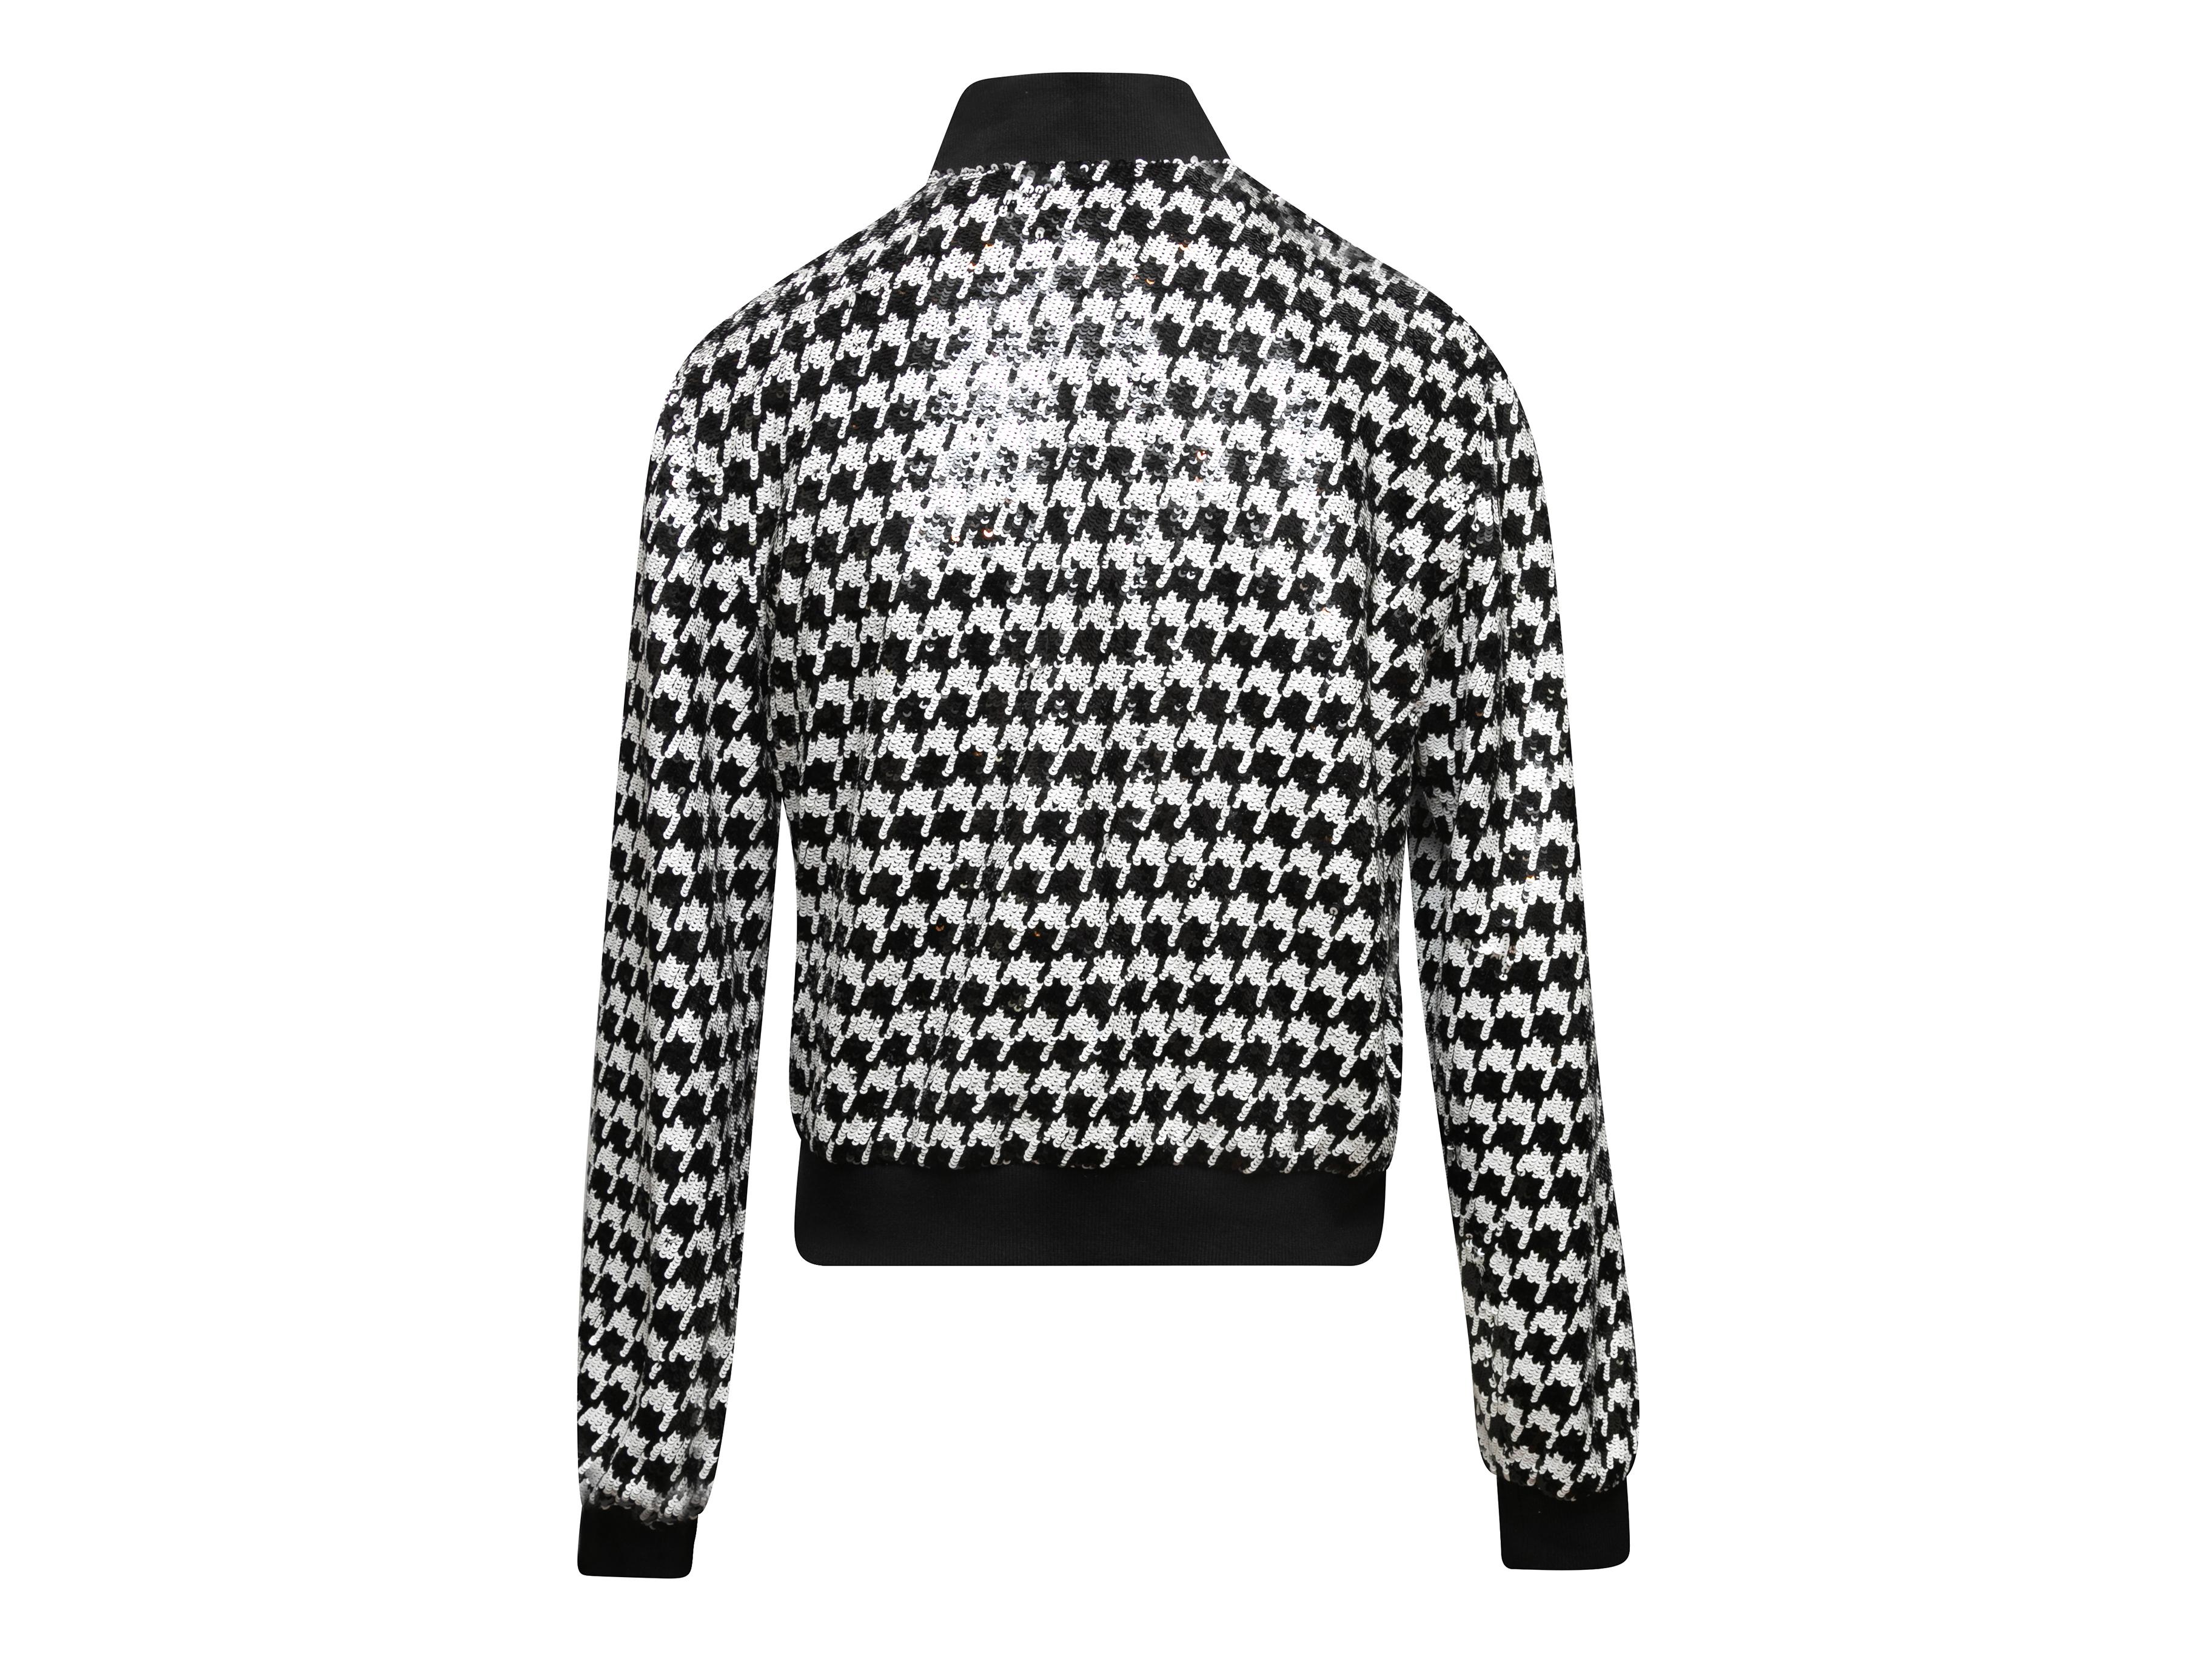 Women's Black & White Alice + Olivia Sequined Houndstooth Jacket Size US S For Sale